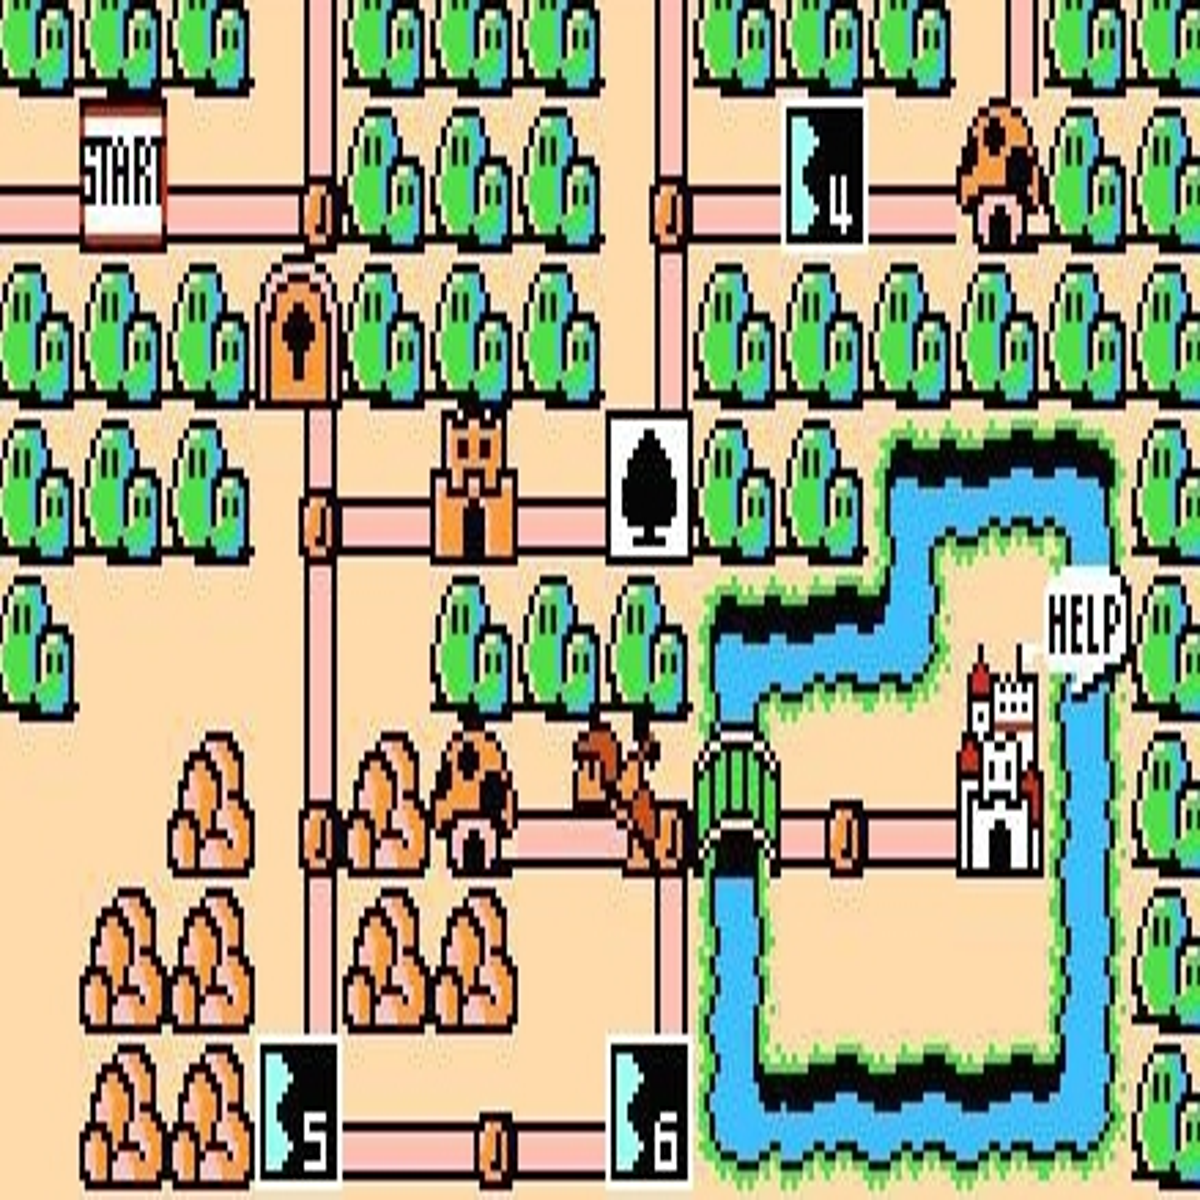 The brilliance of video game maps